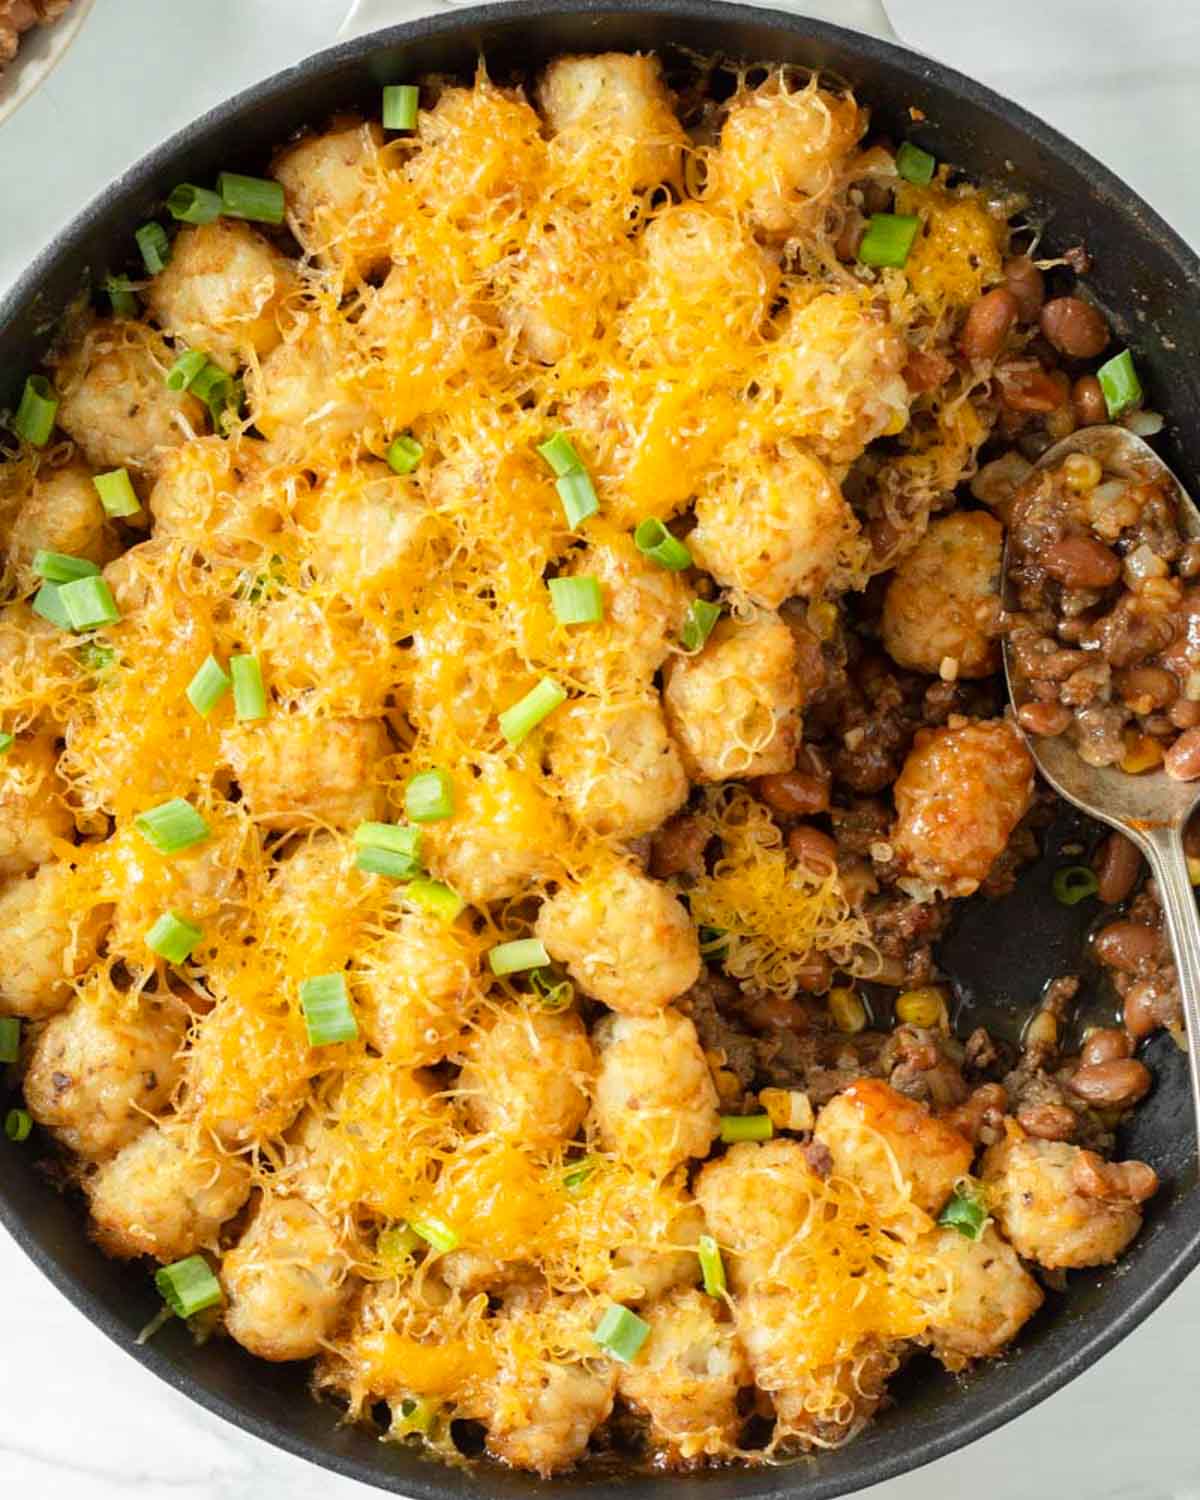 This cowboy tater tot casserole is an easy one-pan dinner recipe made with ground beef mixed with baked beans and corn and topped with cheese and tater tots. We love this easy kid-friendly dinner for a quick weeknight meal.